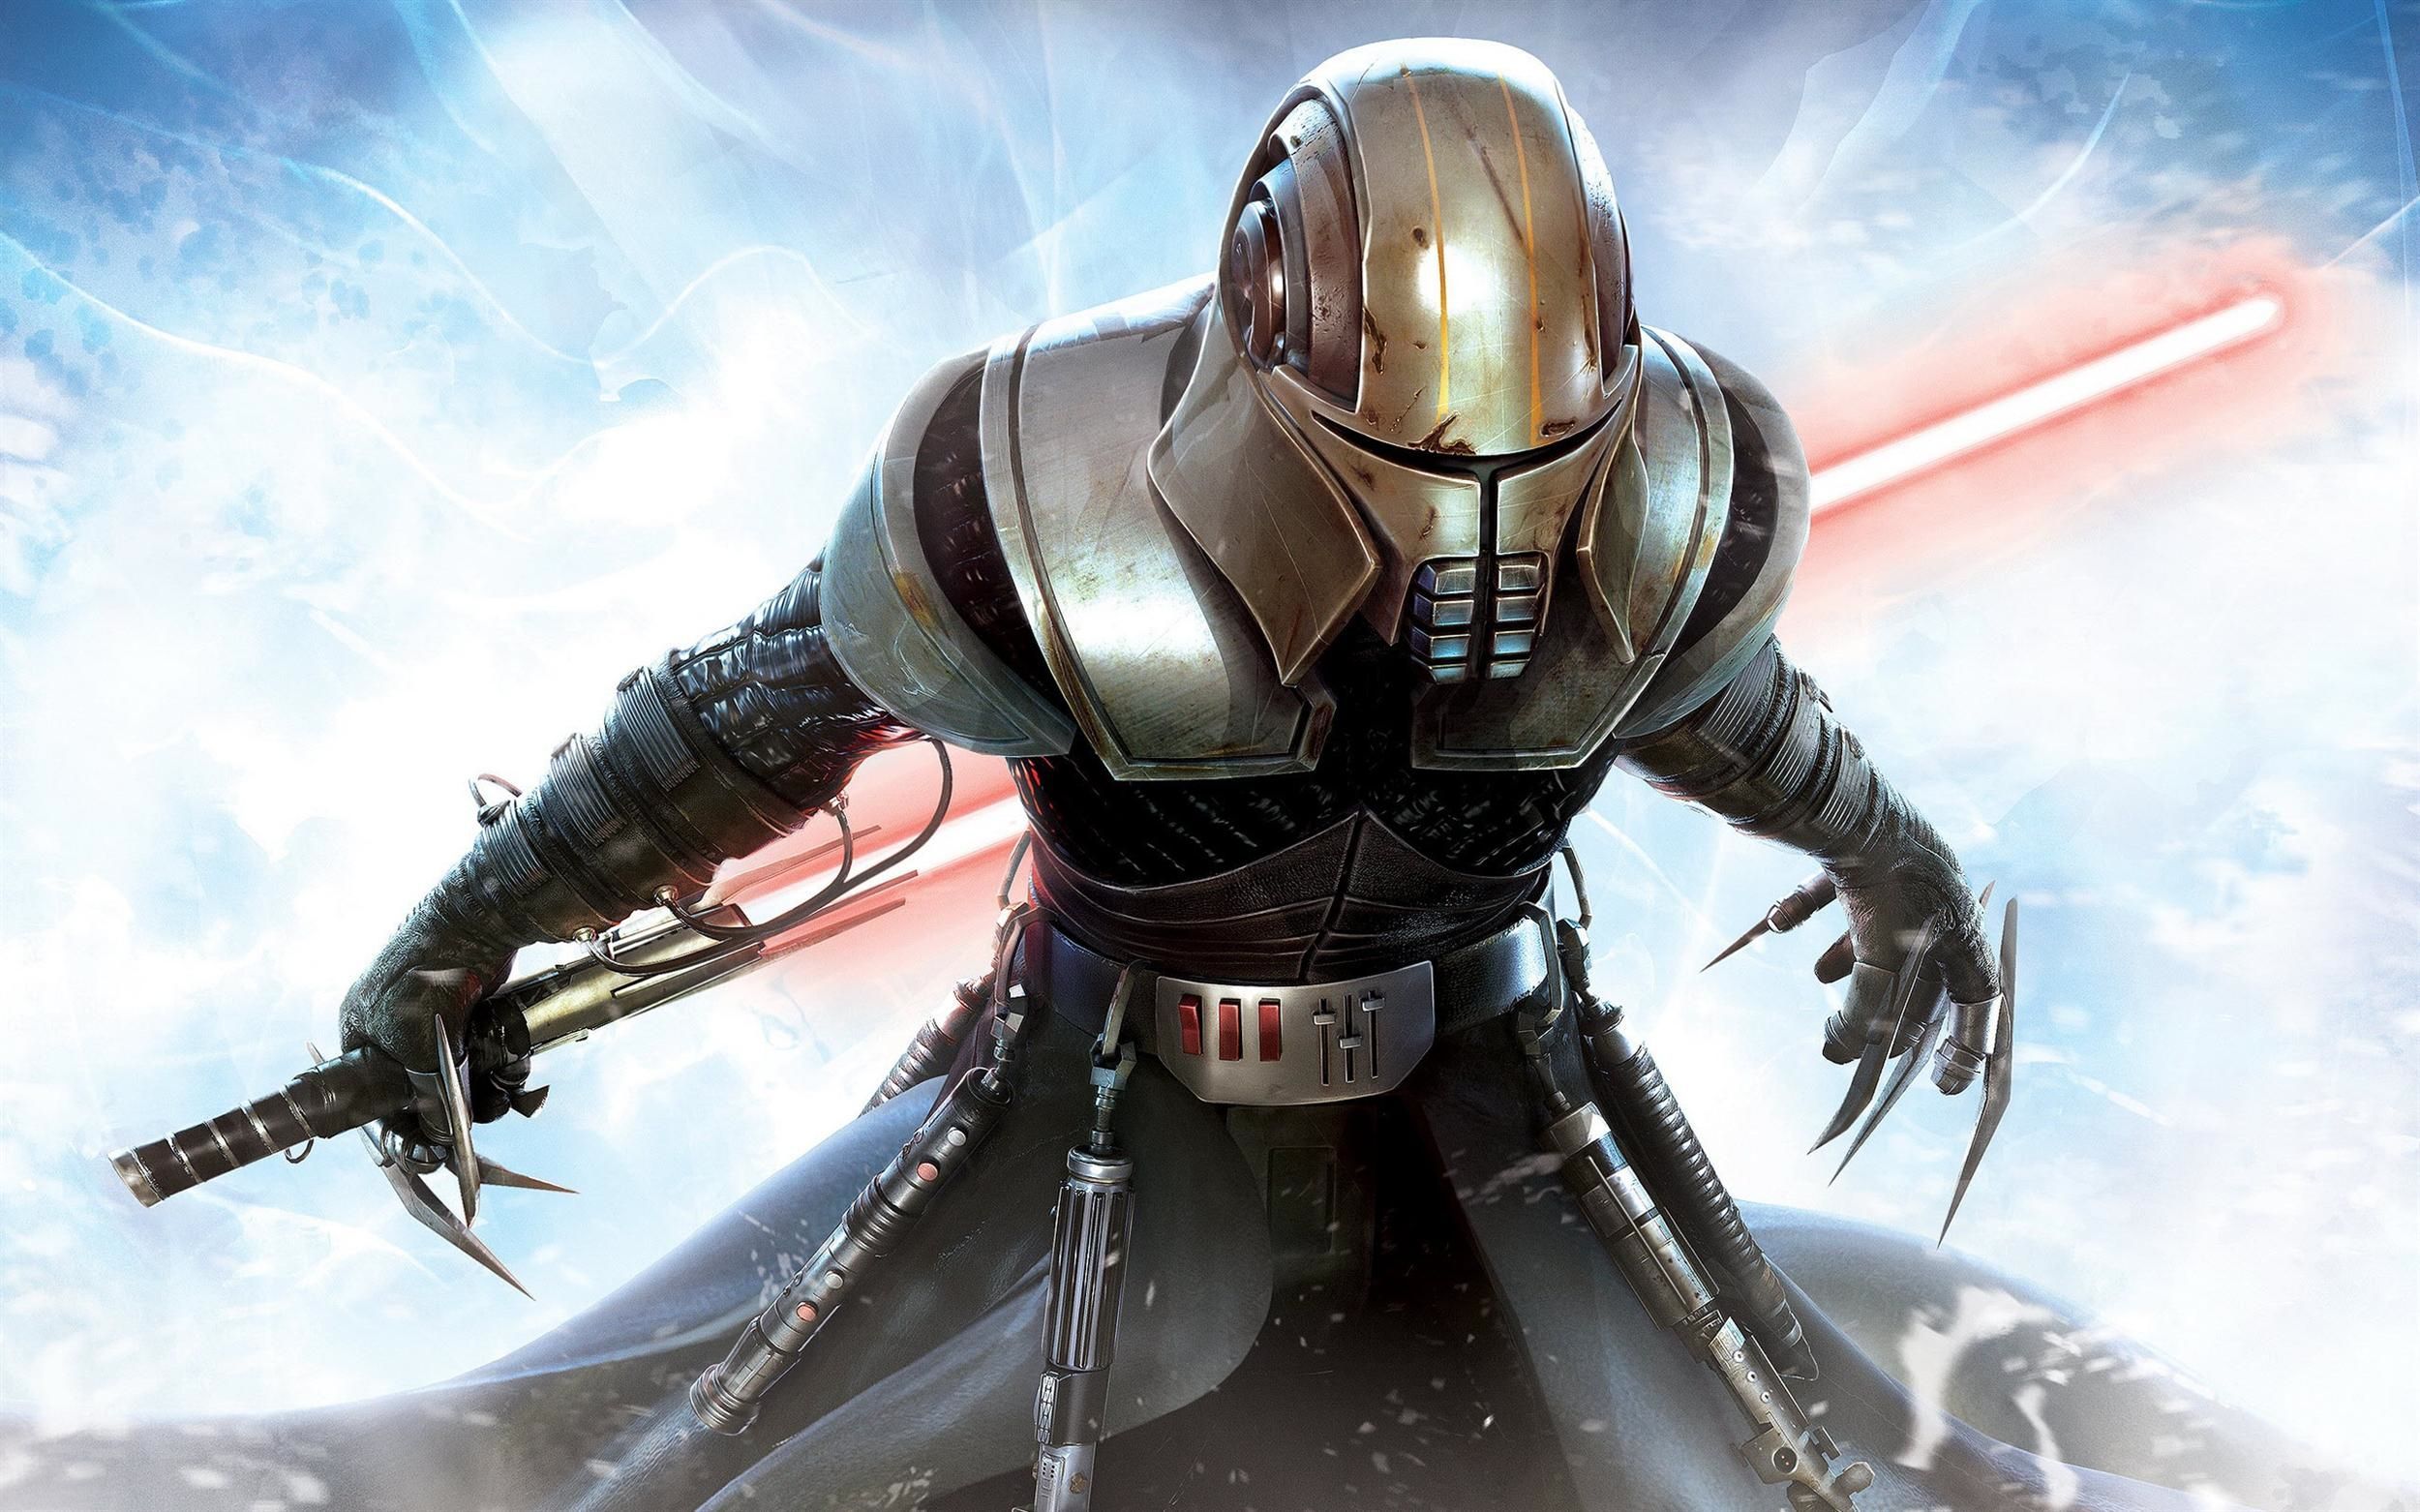 Sith Stalker Armor. Star wars sith, Star wars wallpaper, The force unleashed